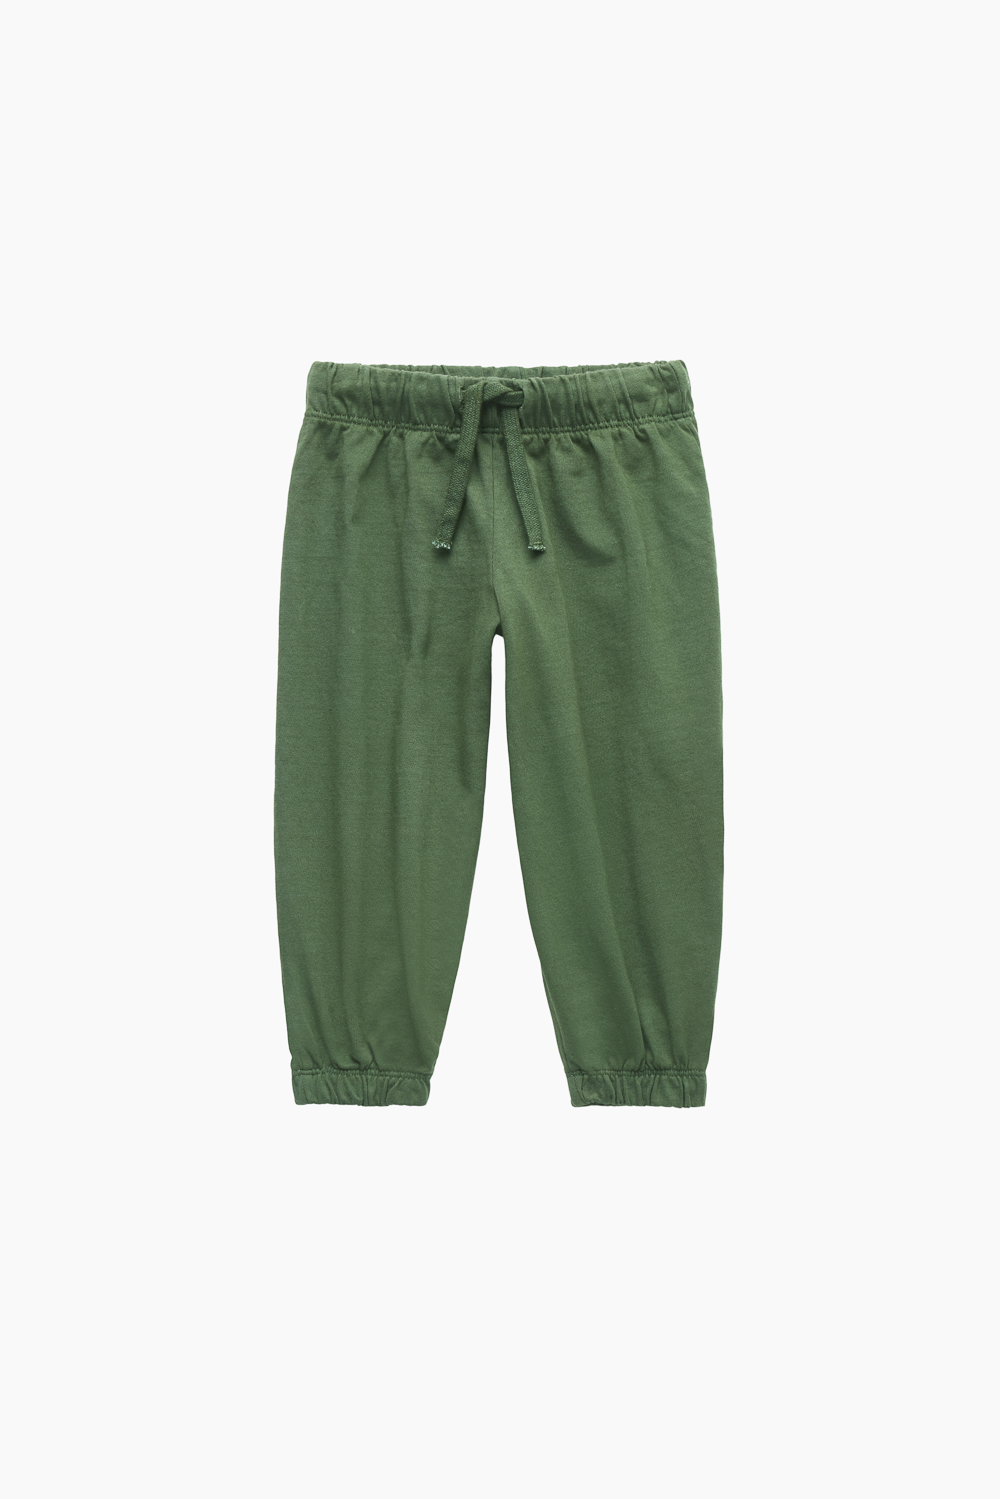 HEAVY COTTON KIDS COTTON JOGGER - ROSEMARY Featured Image